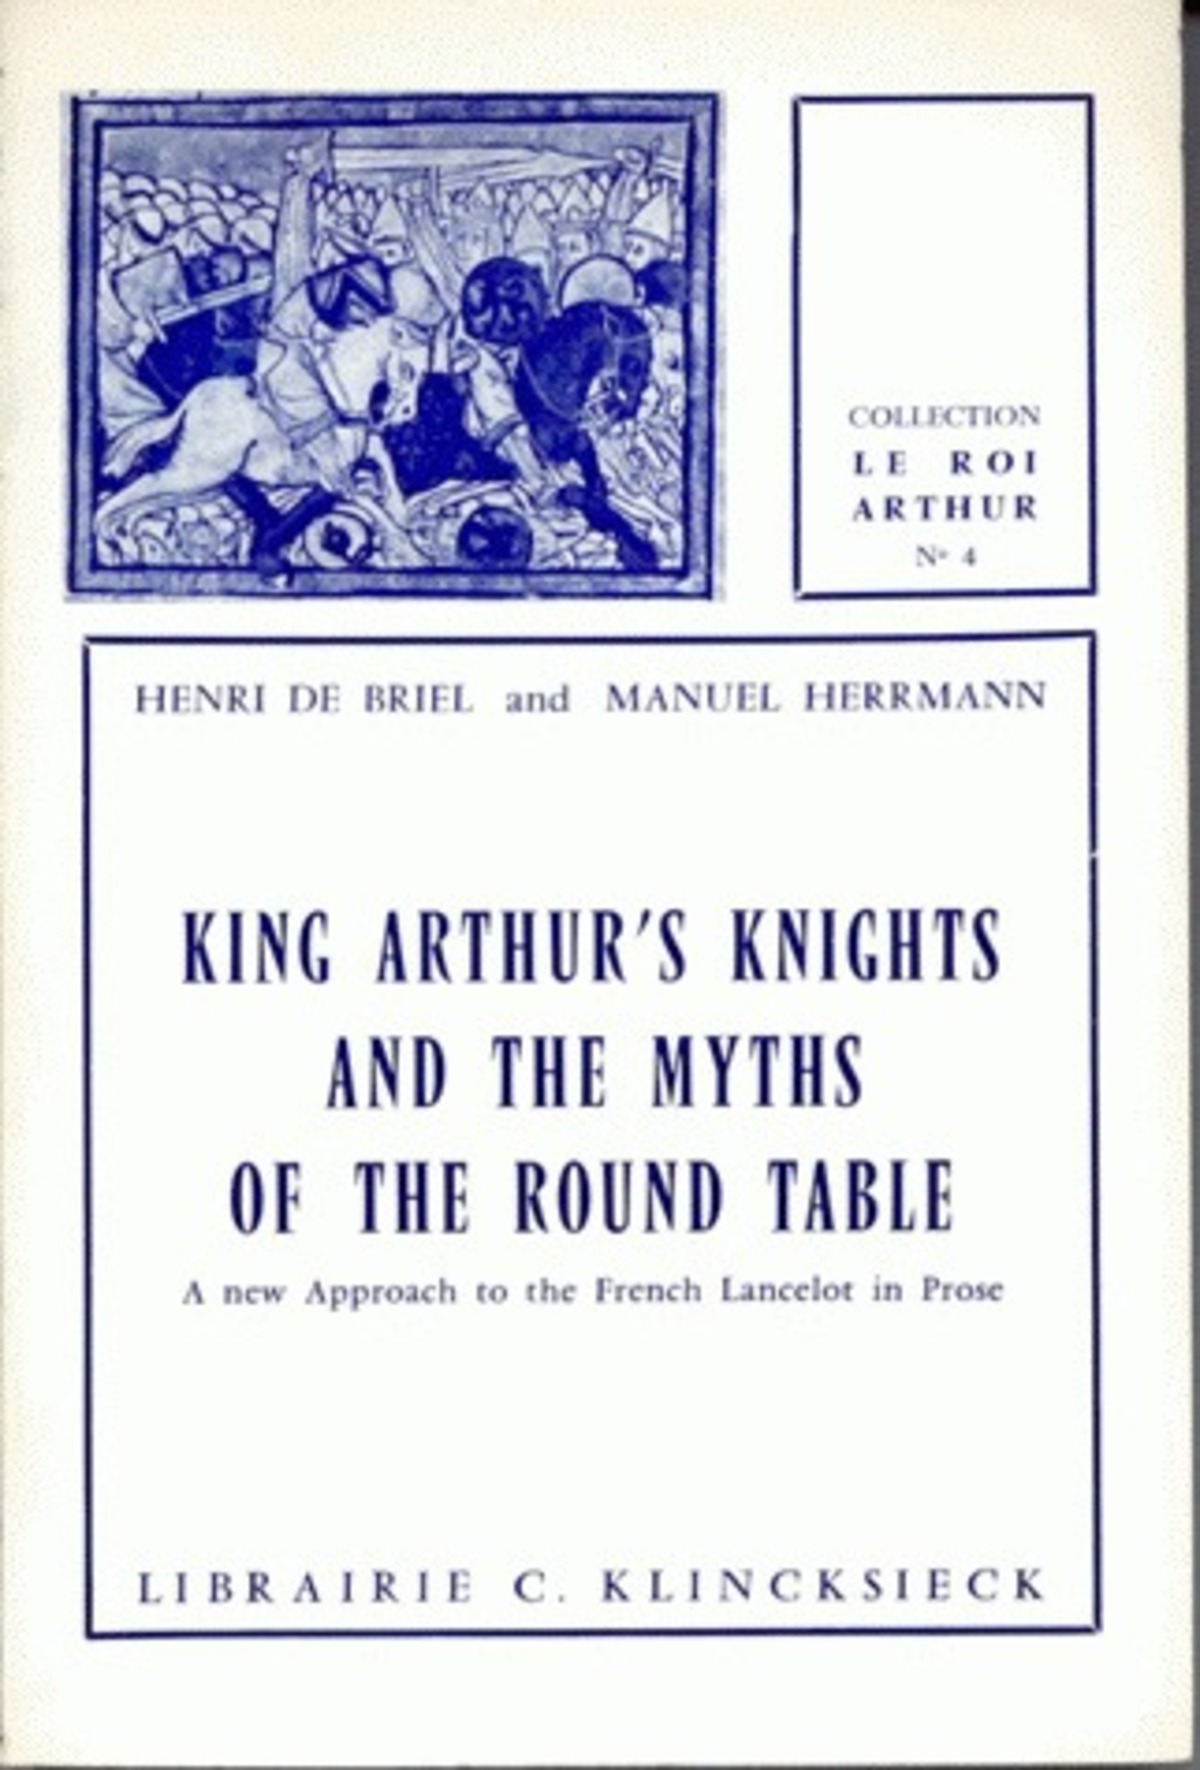 Le King Arthur's Knights, and the Myths of the Round Table